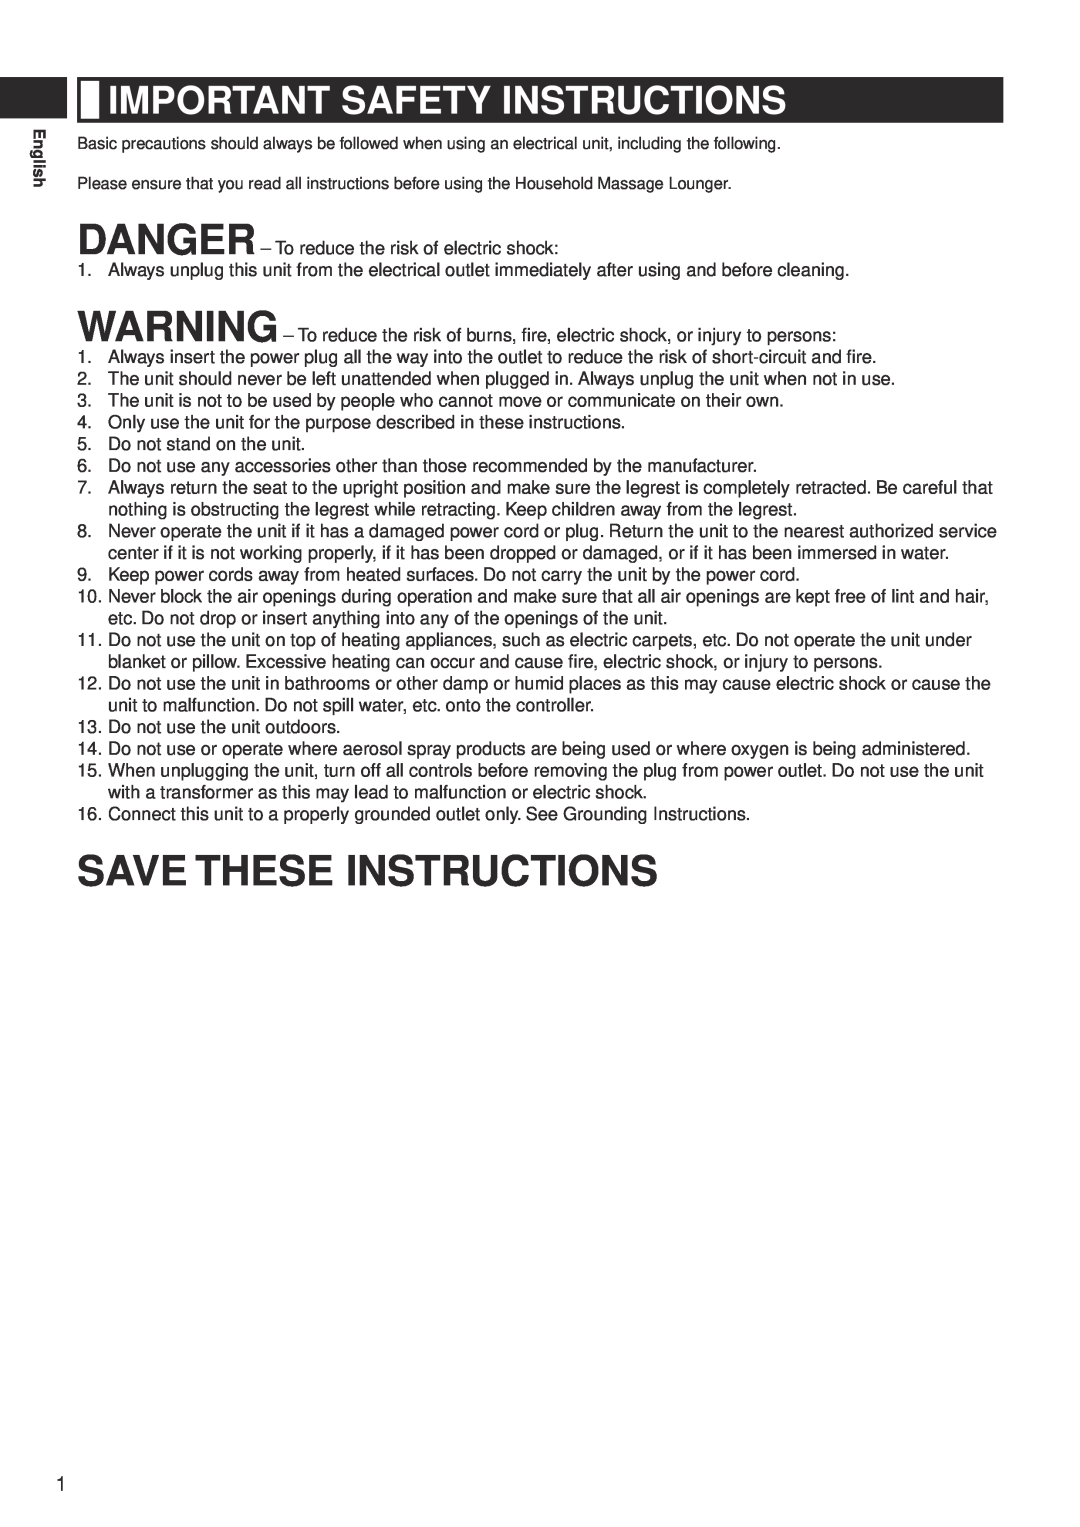 Panasonic EP-MA10 manual Save These Instructions, Important Safety Instructions 